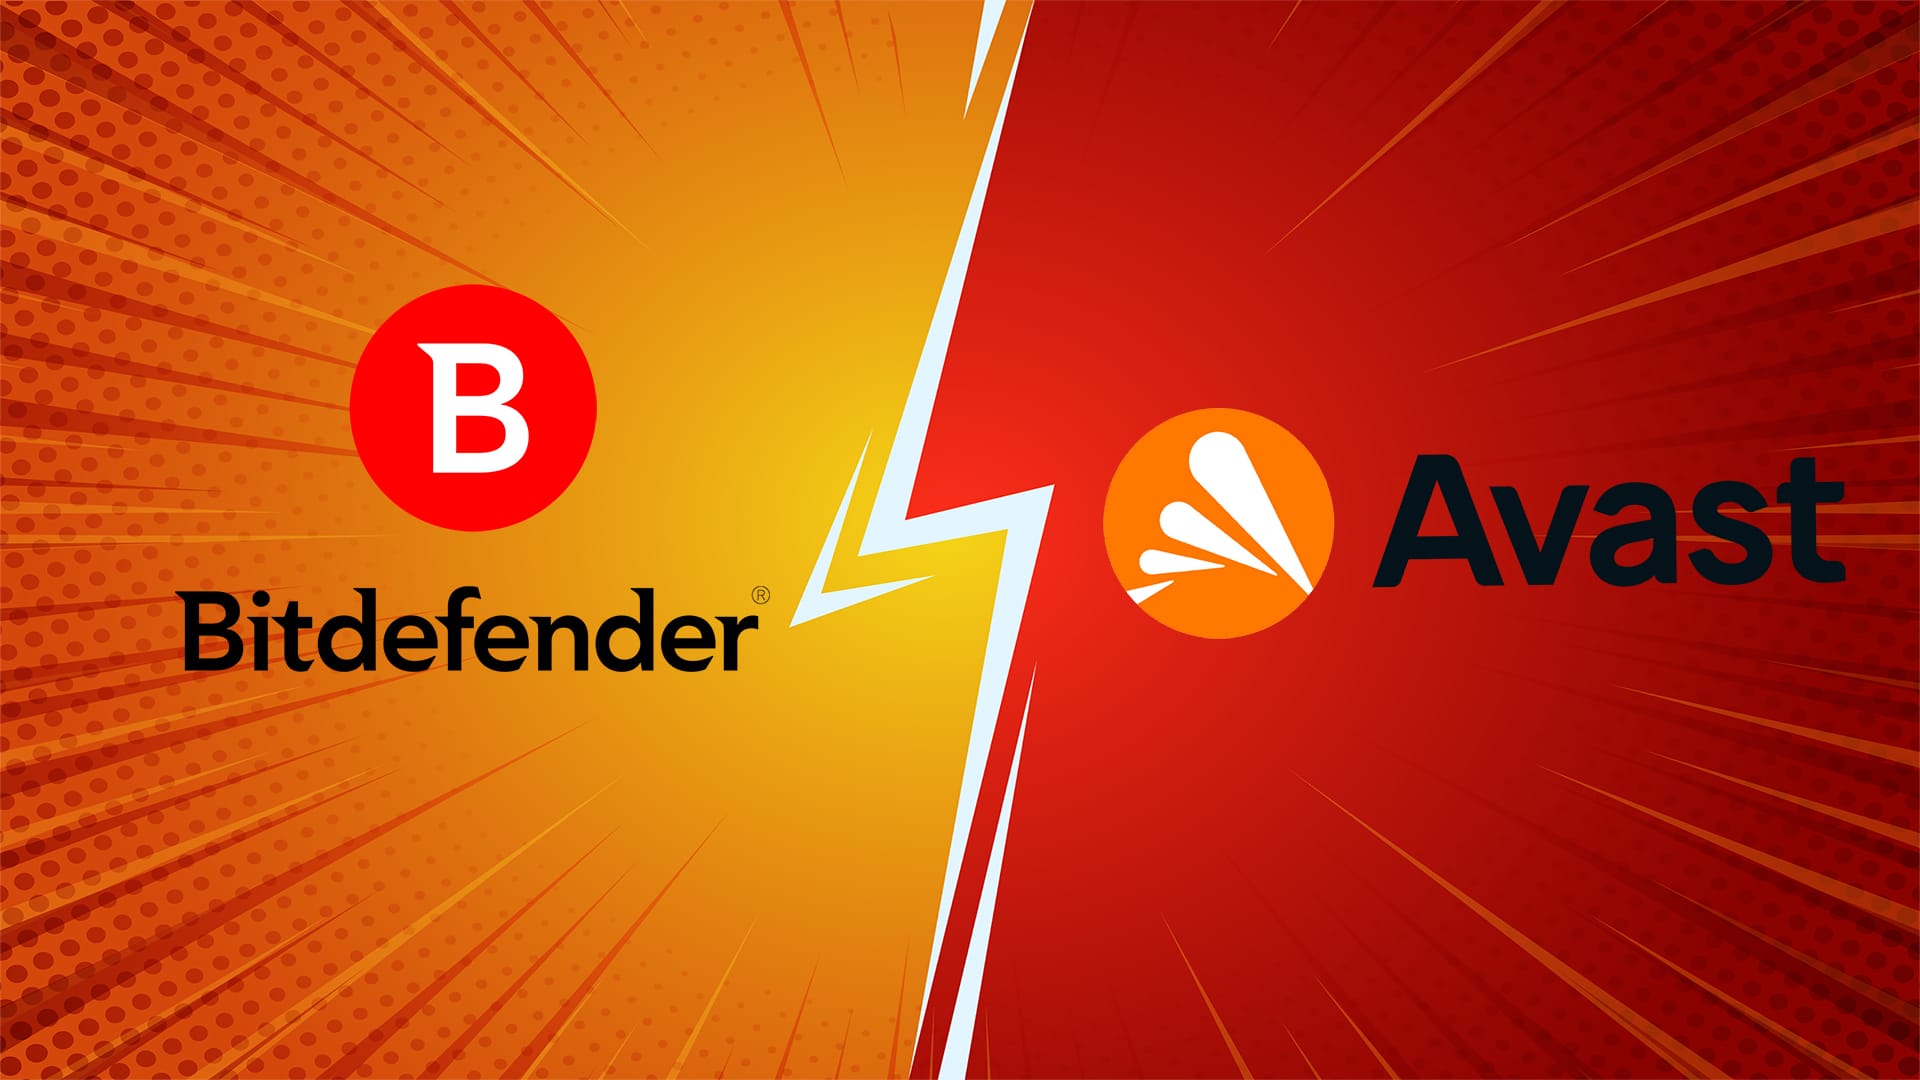 The One Who Offers Higher Performance, Better Privacy and System Efficiency Win the Bitdefender vs Avast Comparison